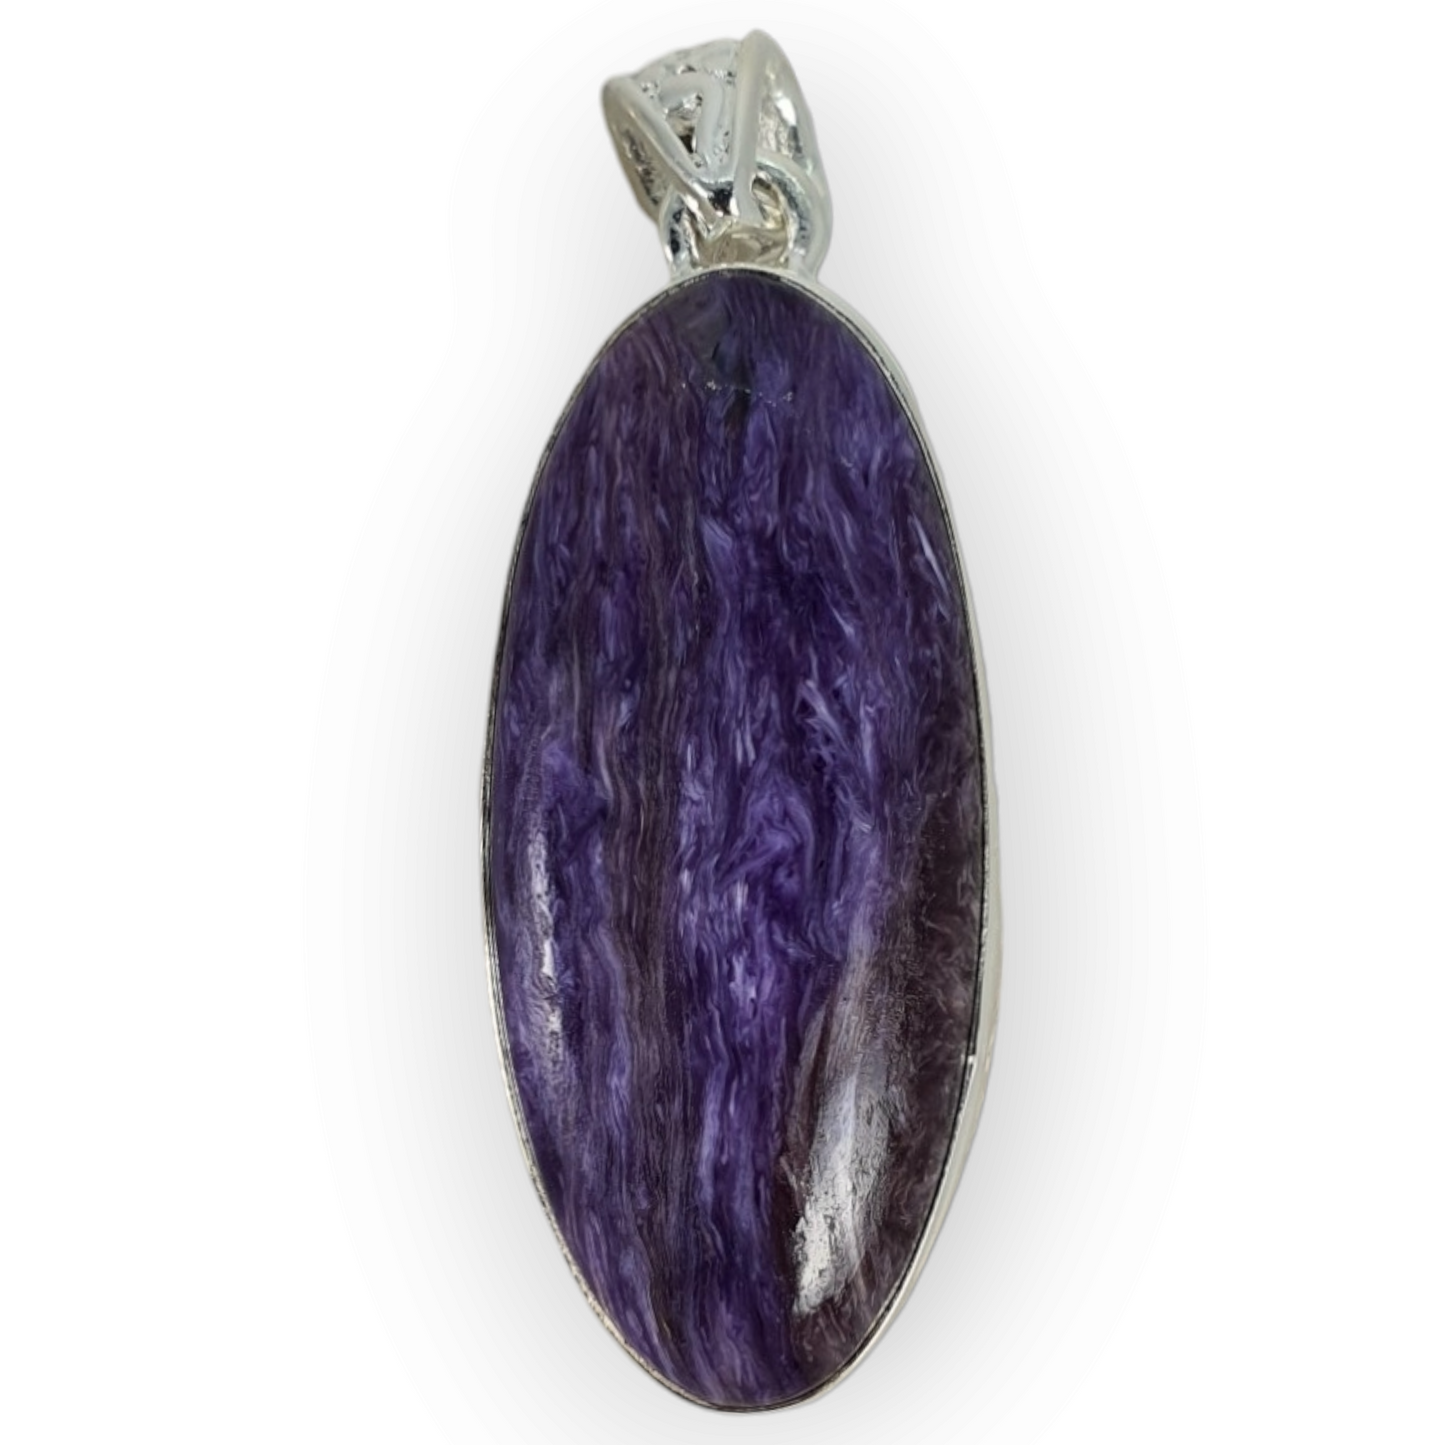 Crystals - Charoite Oval Pendant - Sterling Silver